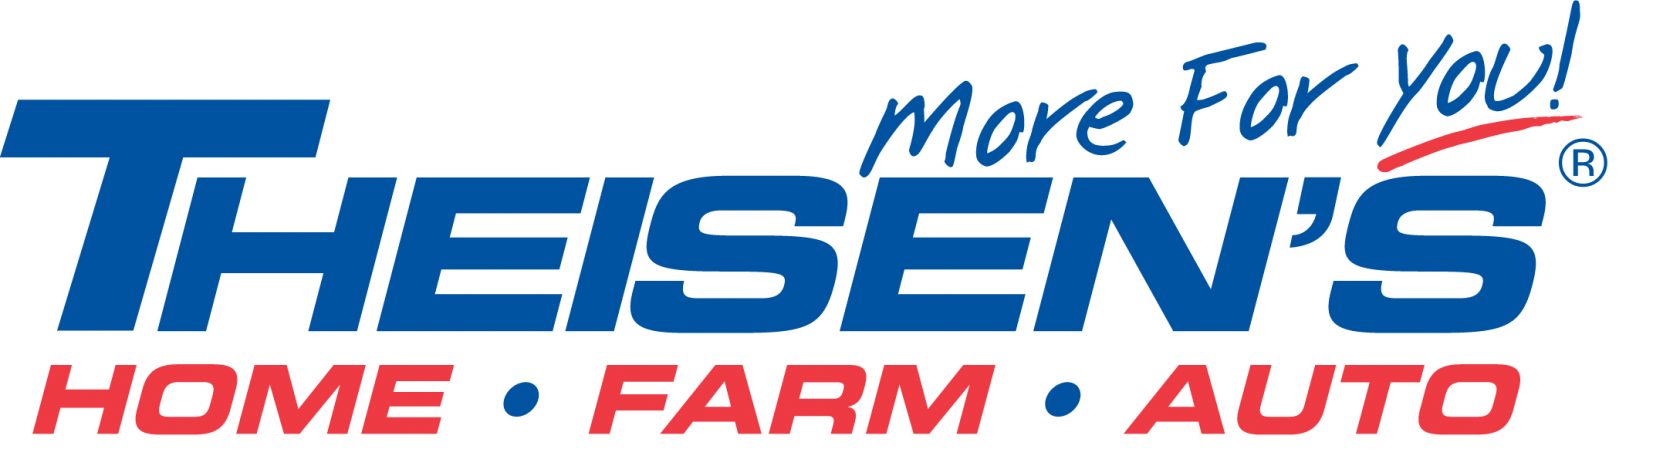 Theisen's More For You logo 2012 COLOR